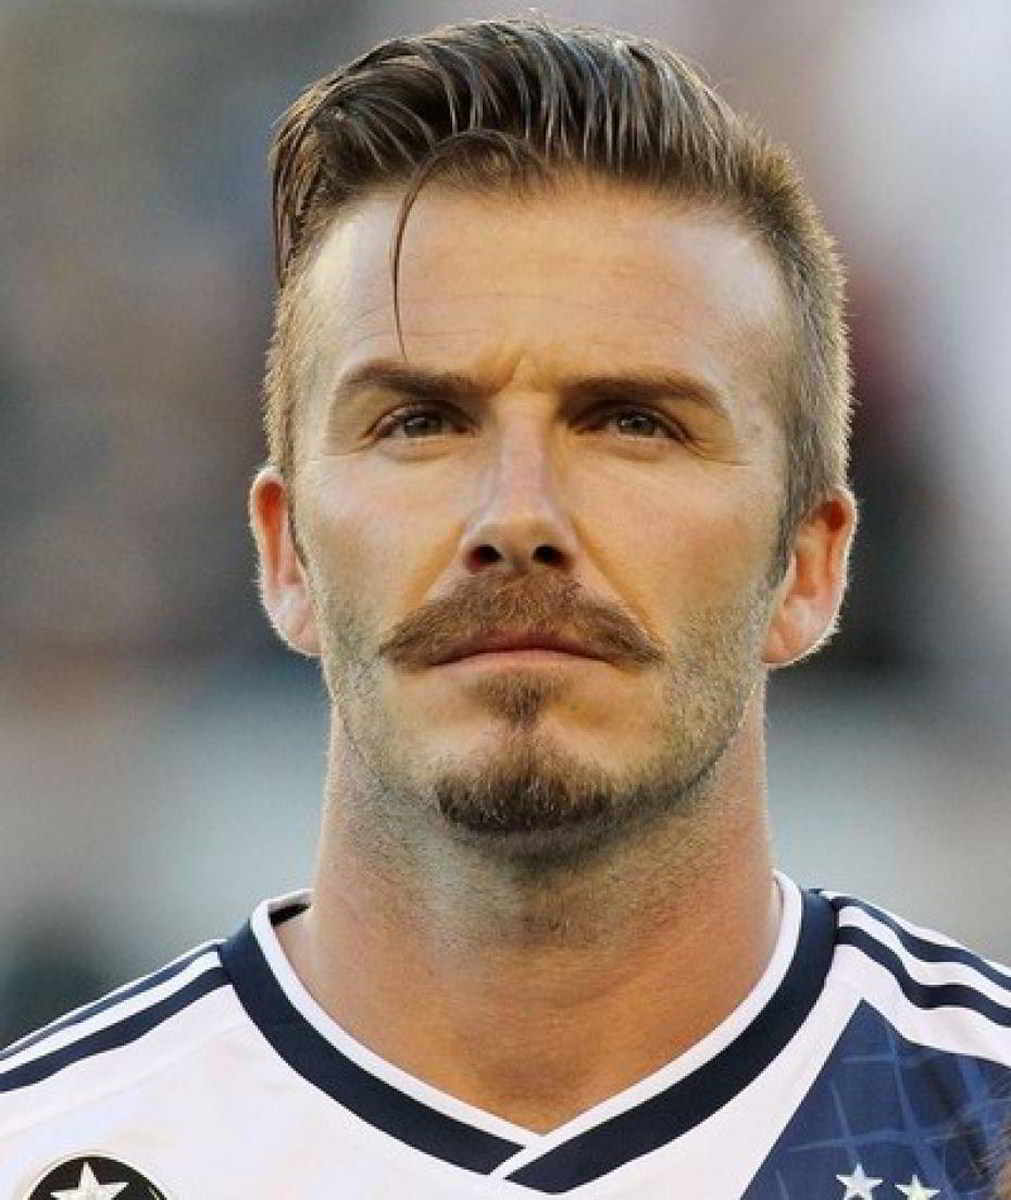 25 best pictures of david beckham haircut - blogrope